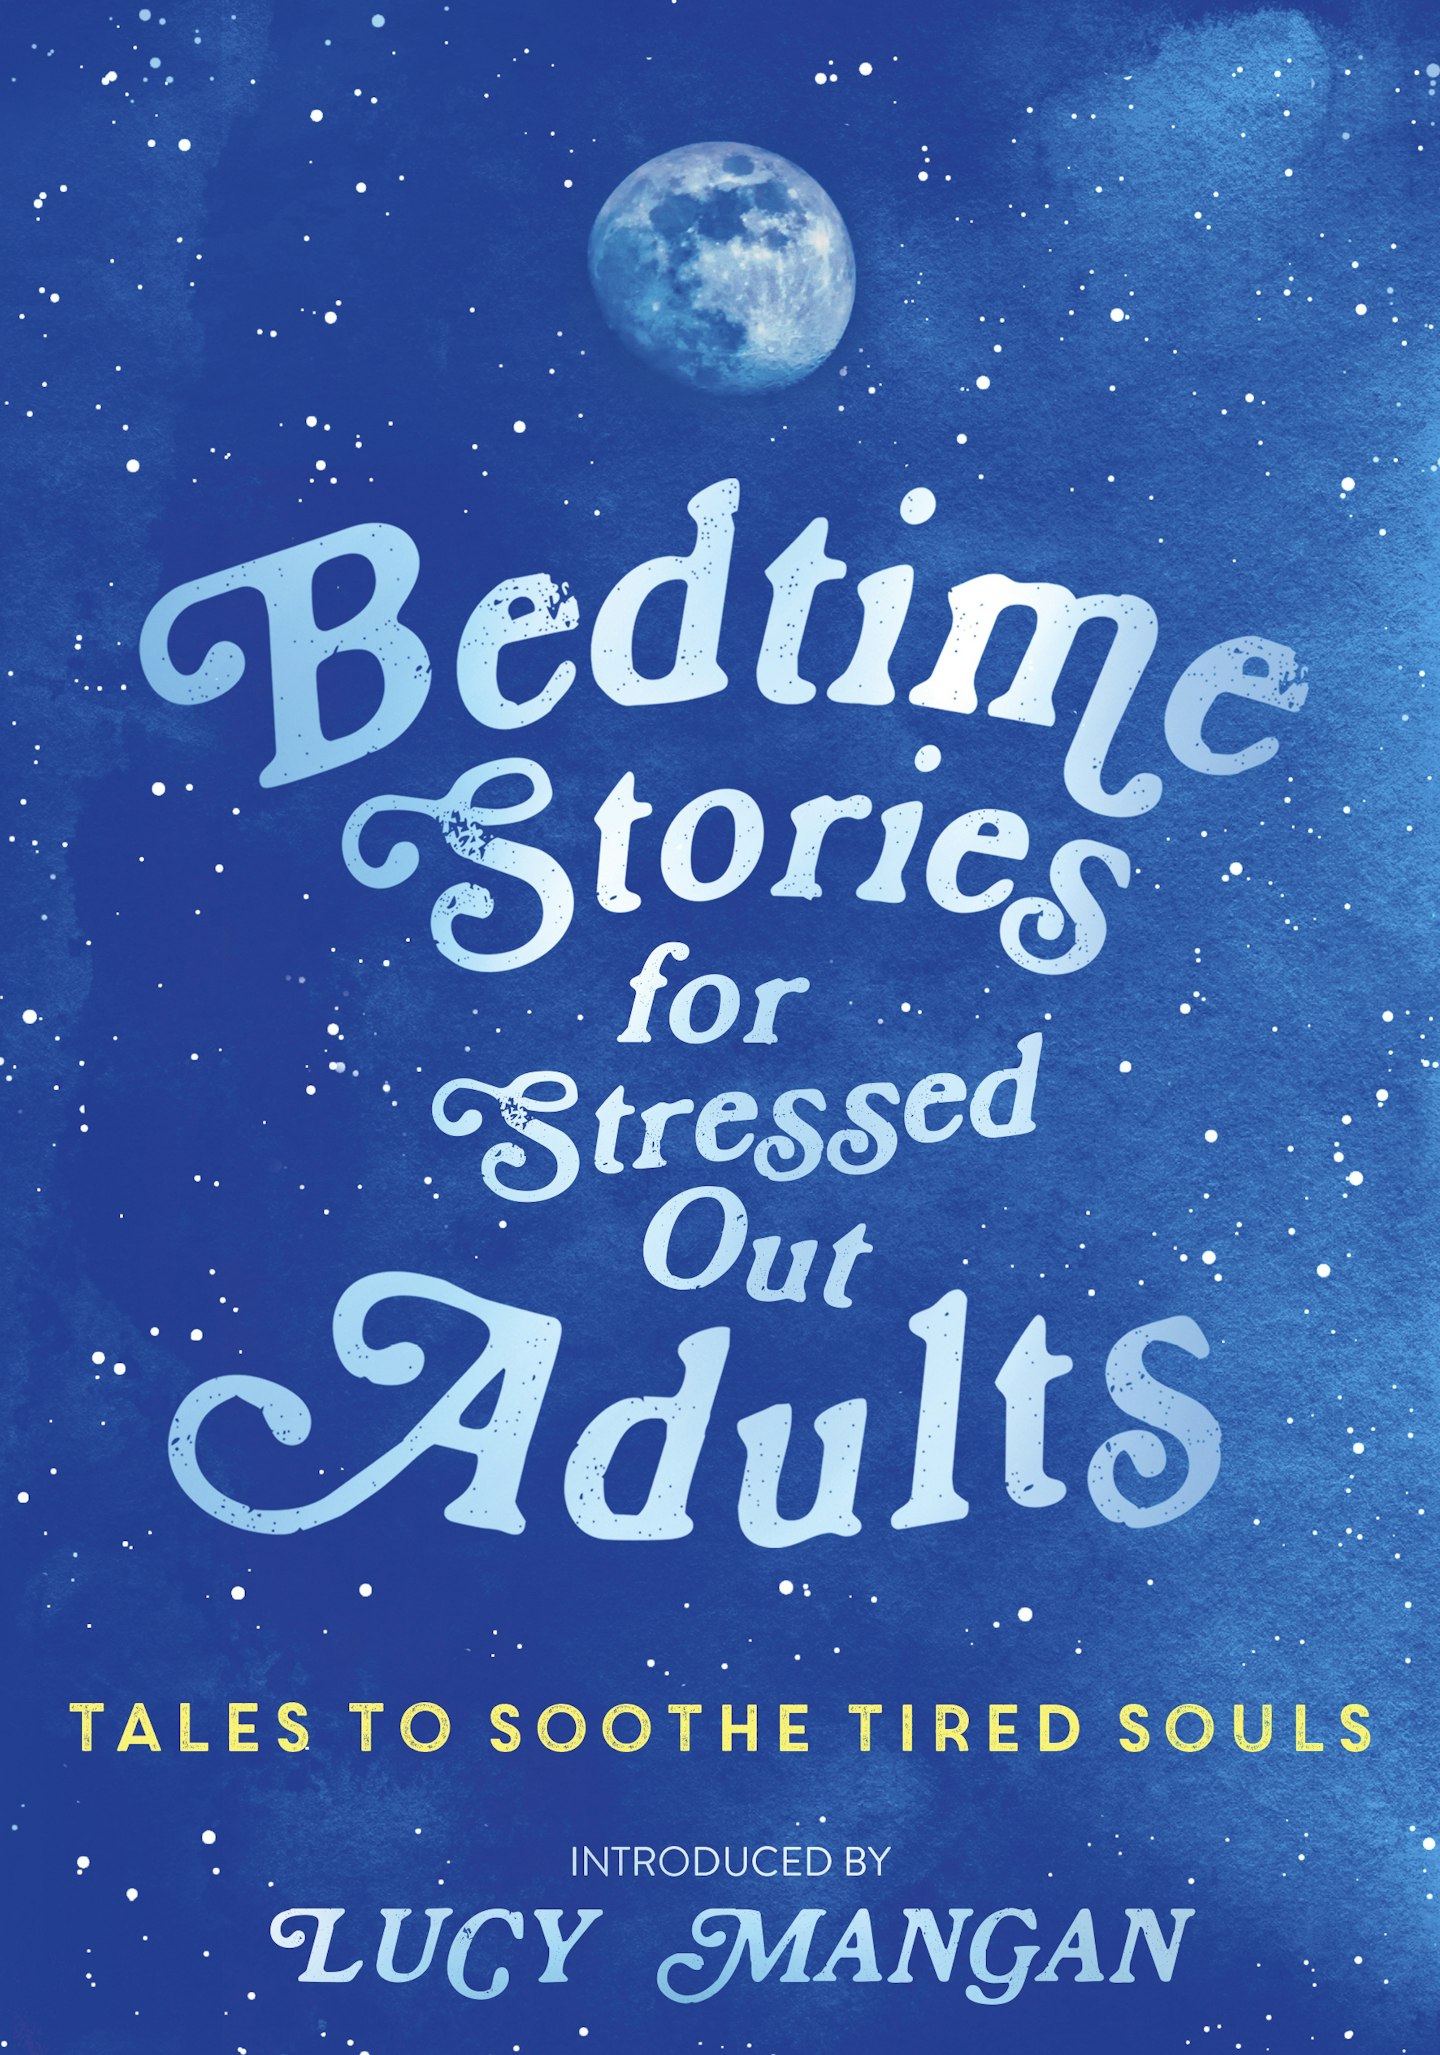 Bedtime Stories for Stressed Out Adults - introduced by Lucy Mangan (Hodder & Stoughton)